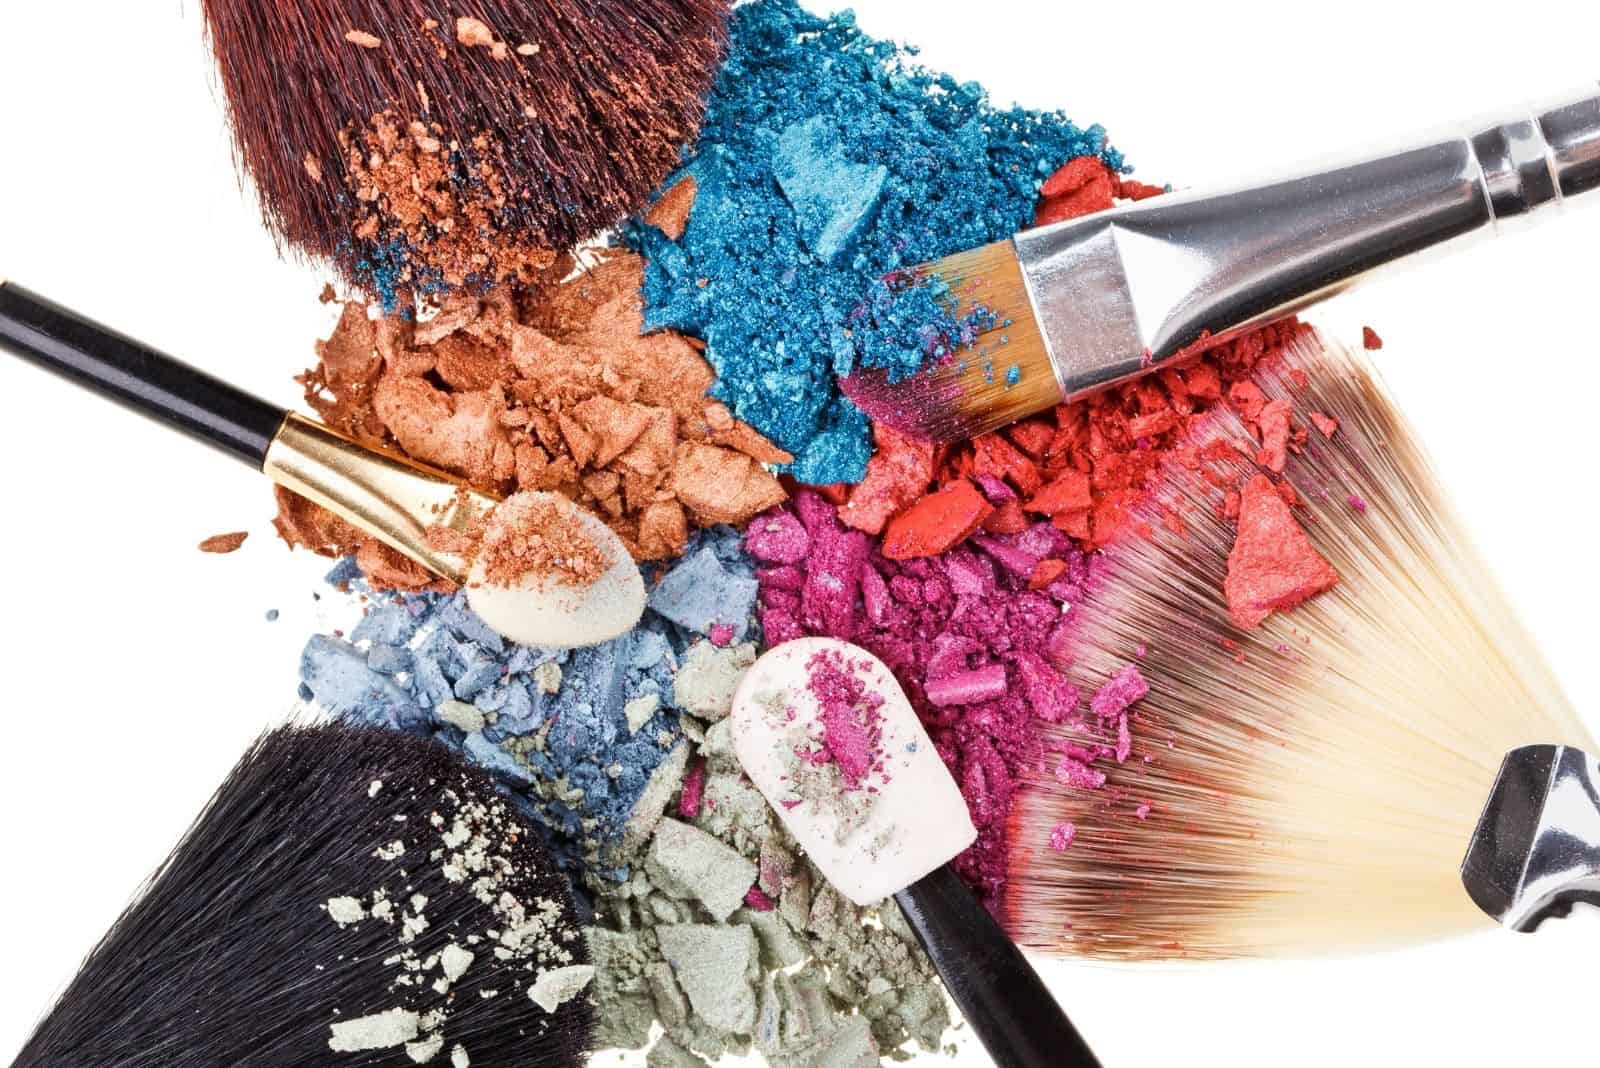 what can you use to clean makeup brushes